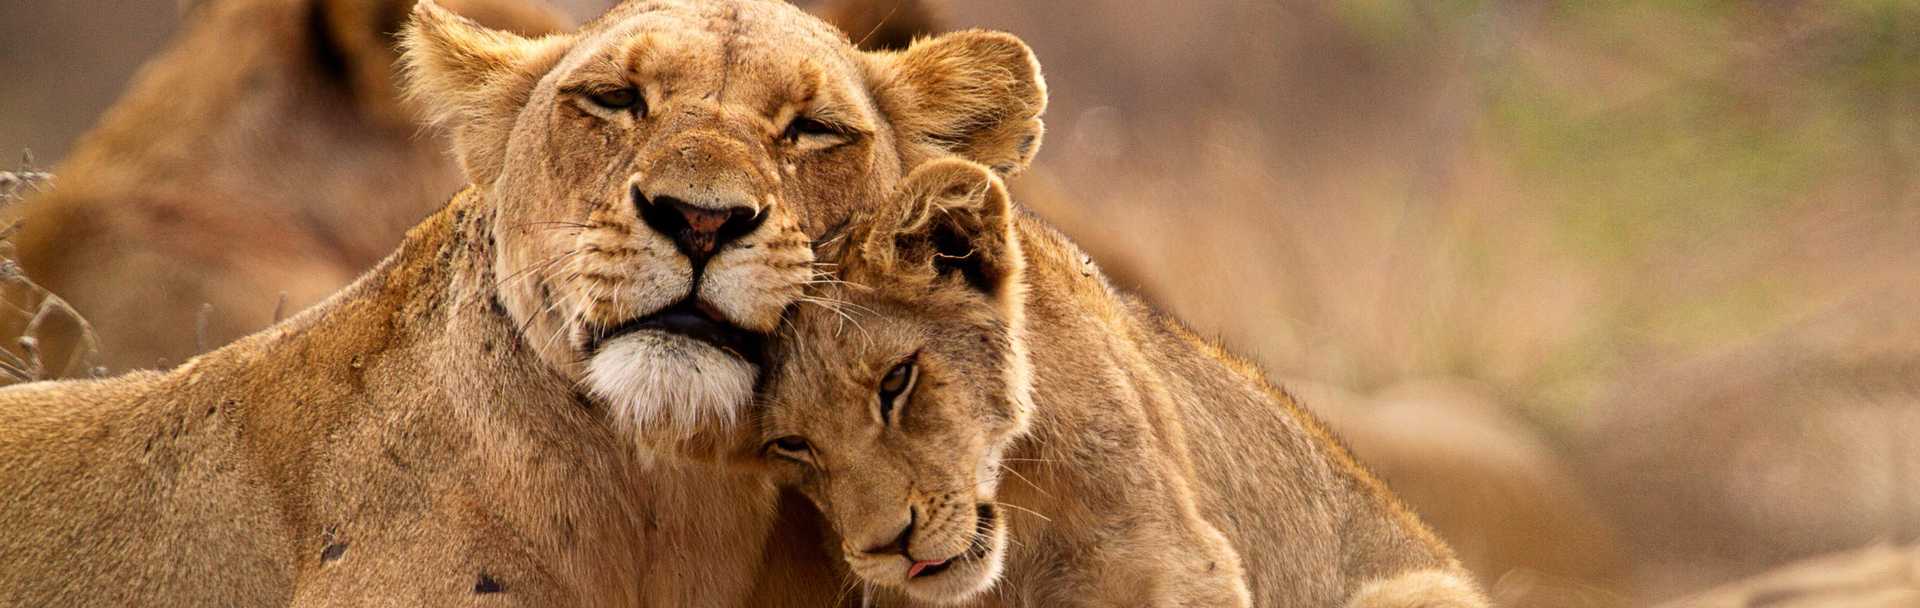 Lioness and her cub in Kruger National Park, South Africa